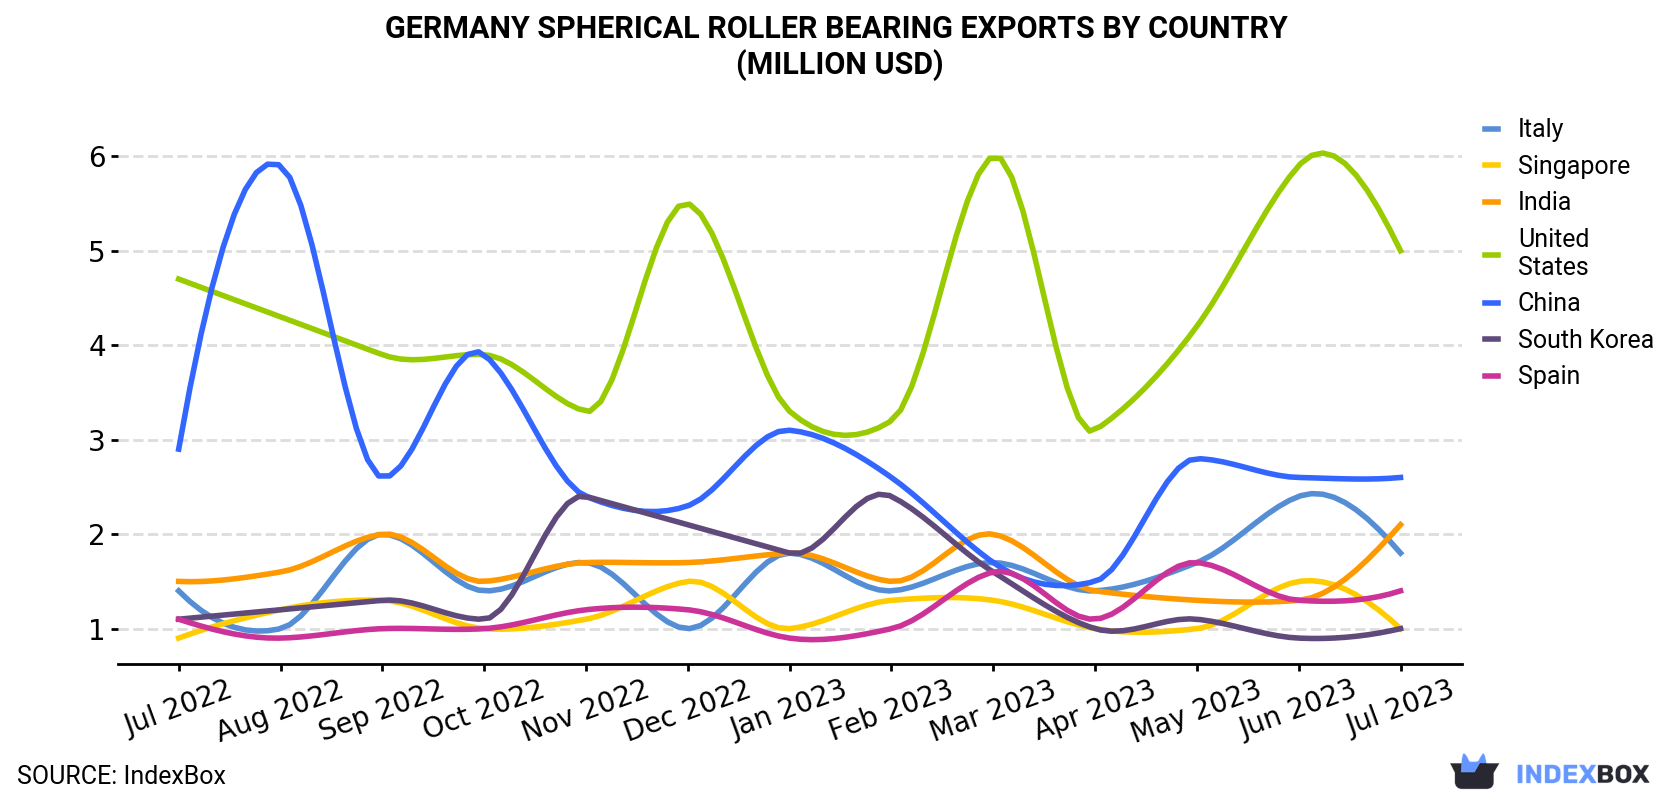 Germany Spherical Roller Bearing Exports By Country (Million USD)